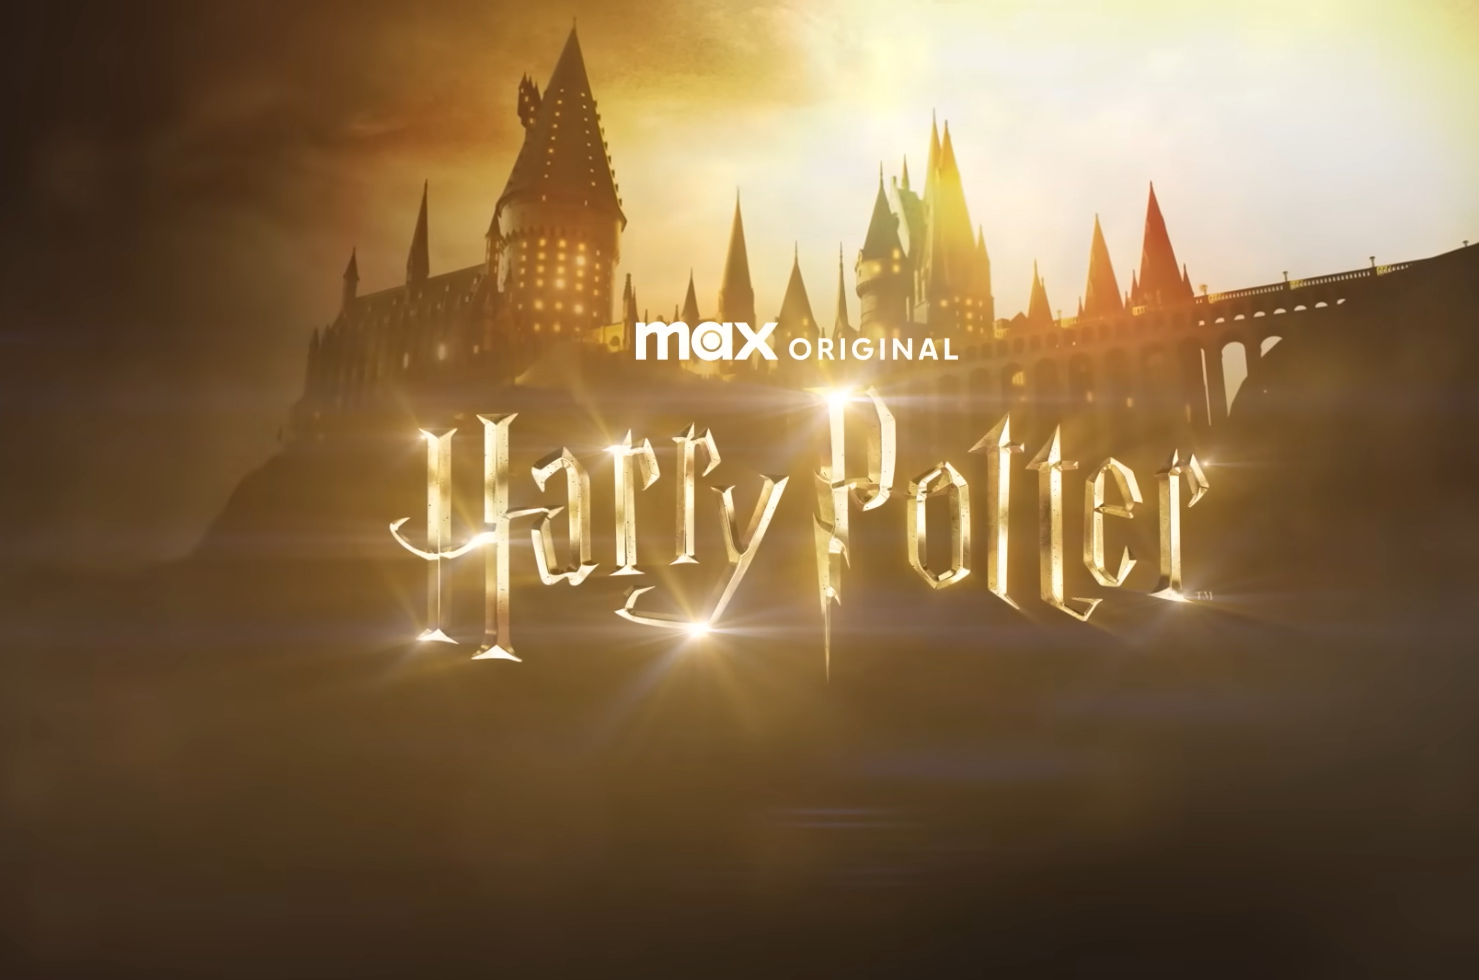 Warner Bros. and HBO plan to make a TV series on every book of Harry Potter